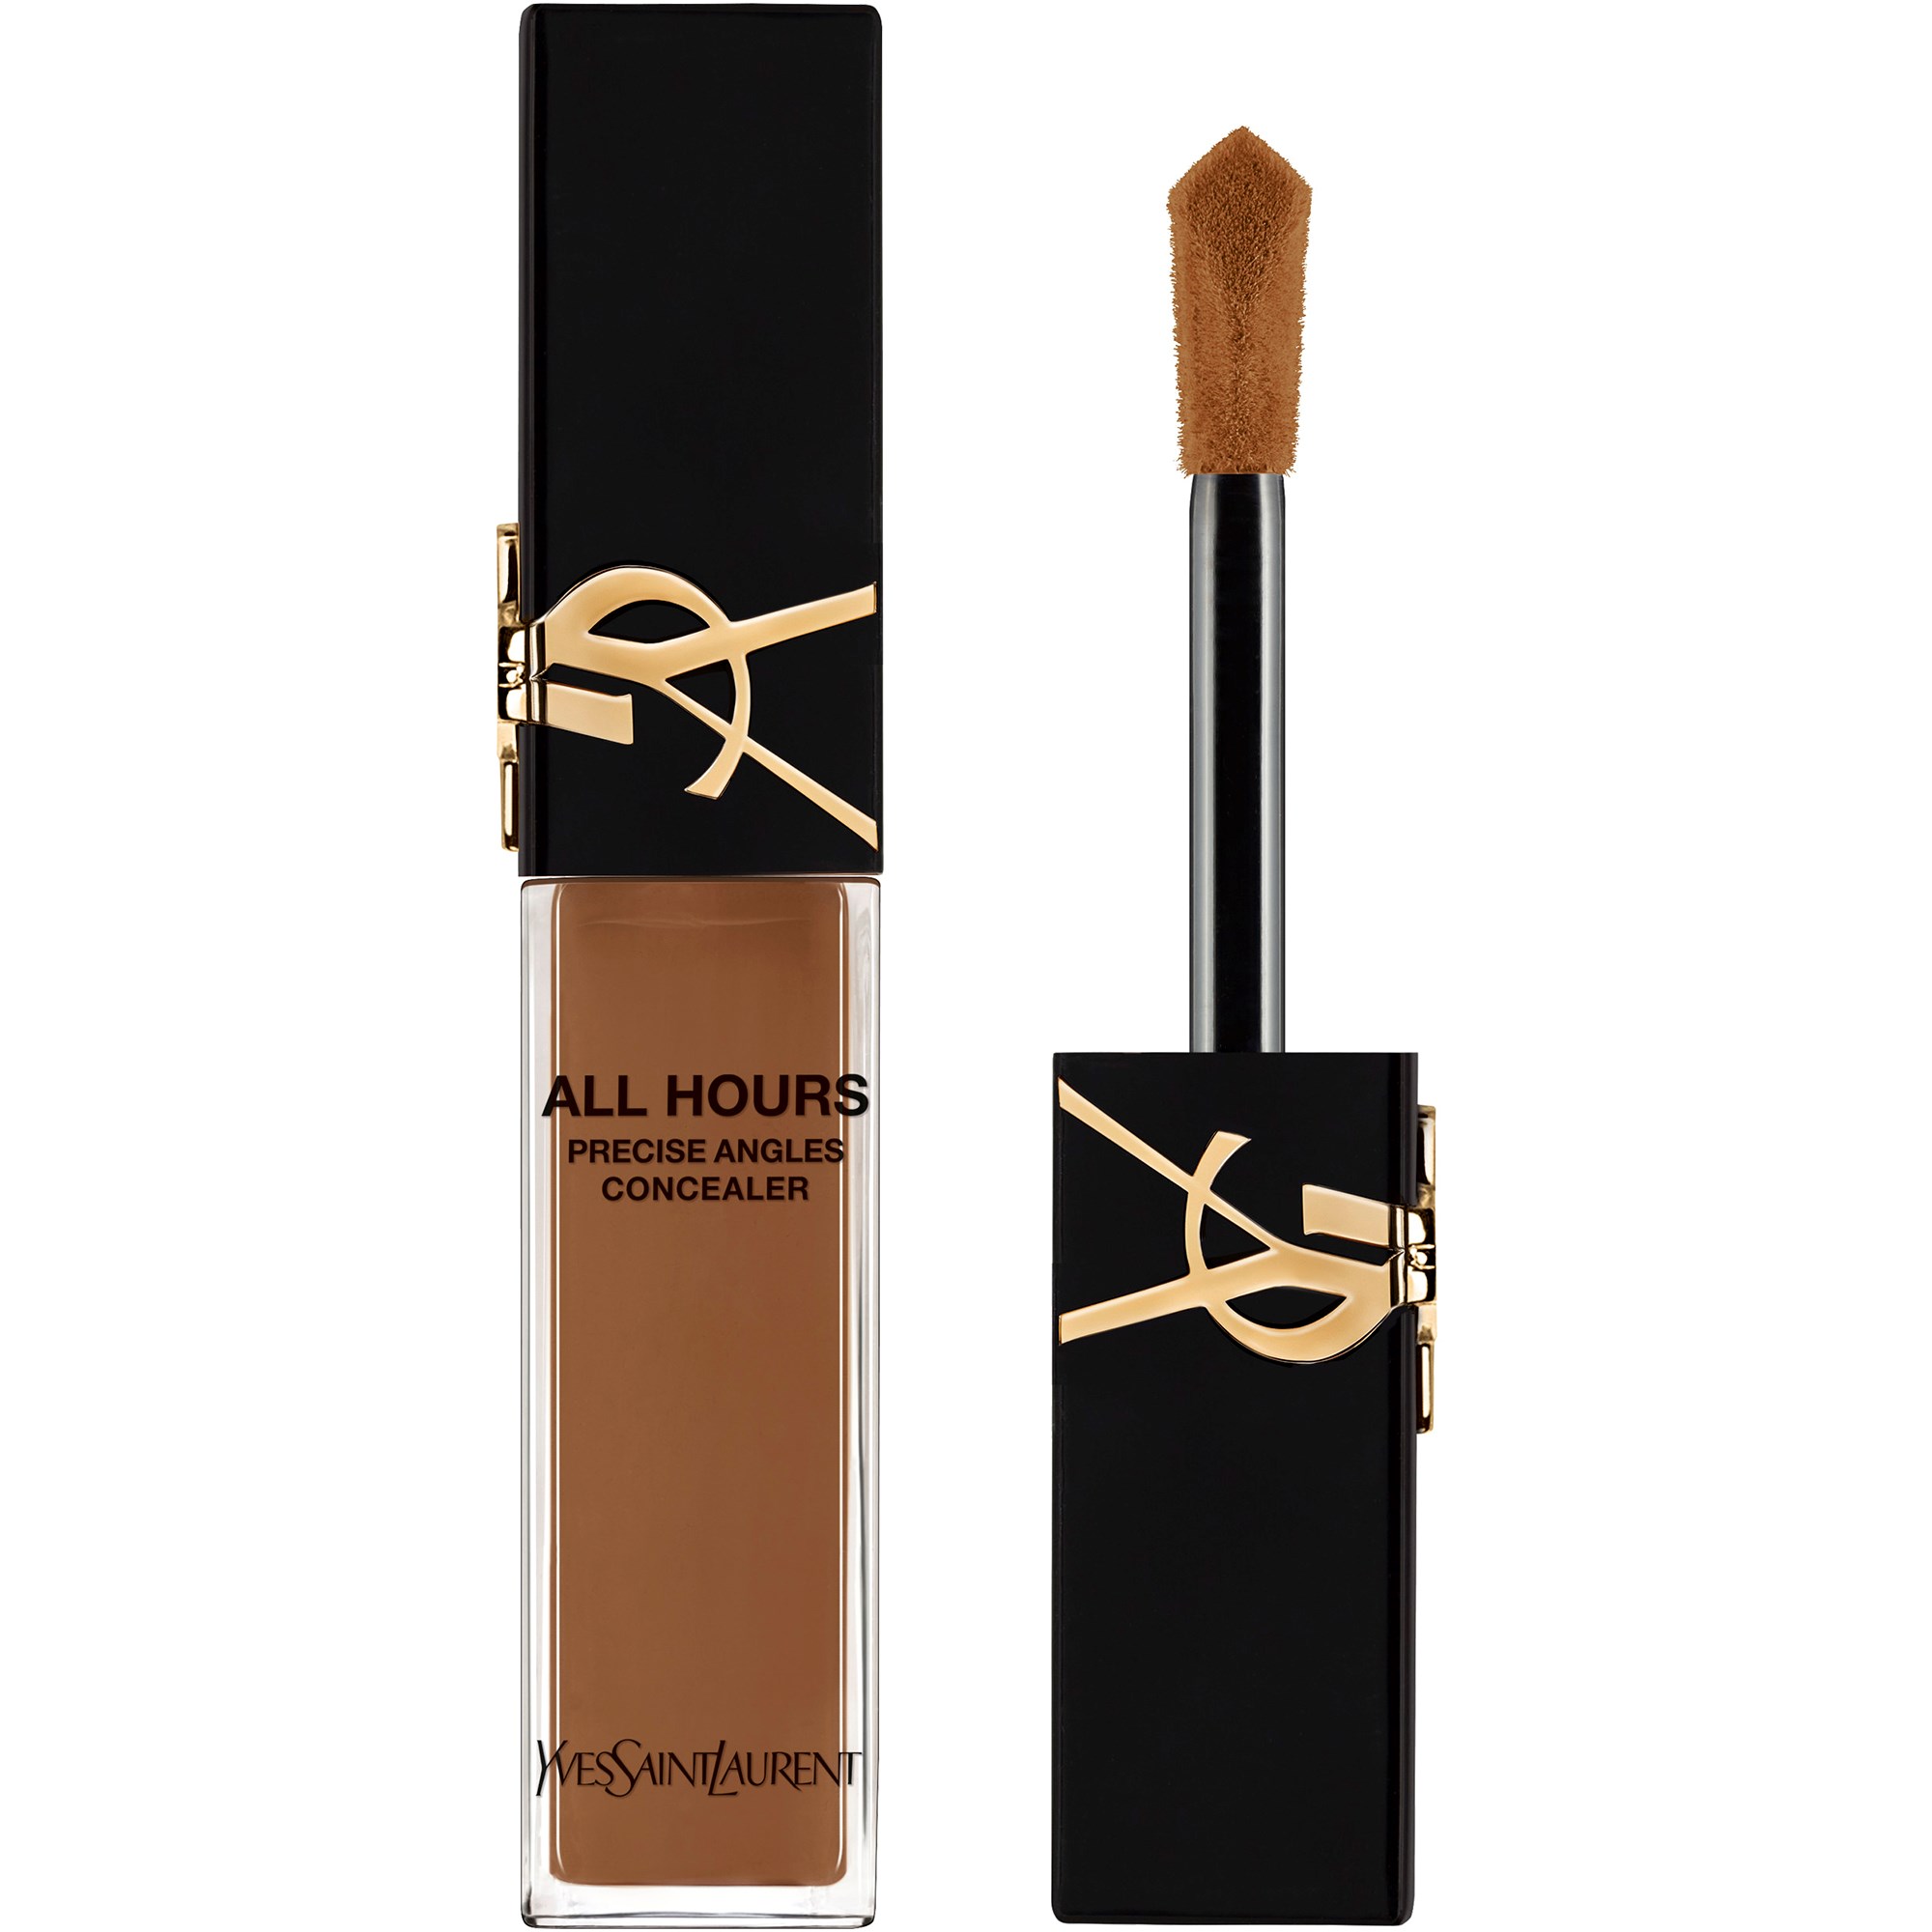 Yves Saint Laurent All Hours Precise Angles Concealer DN5